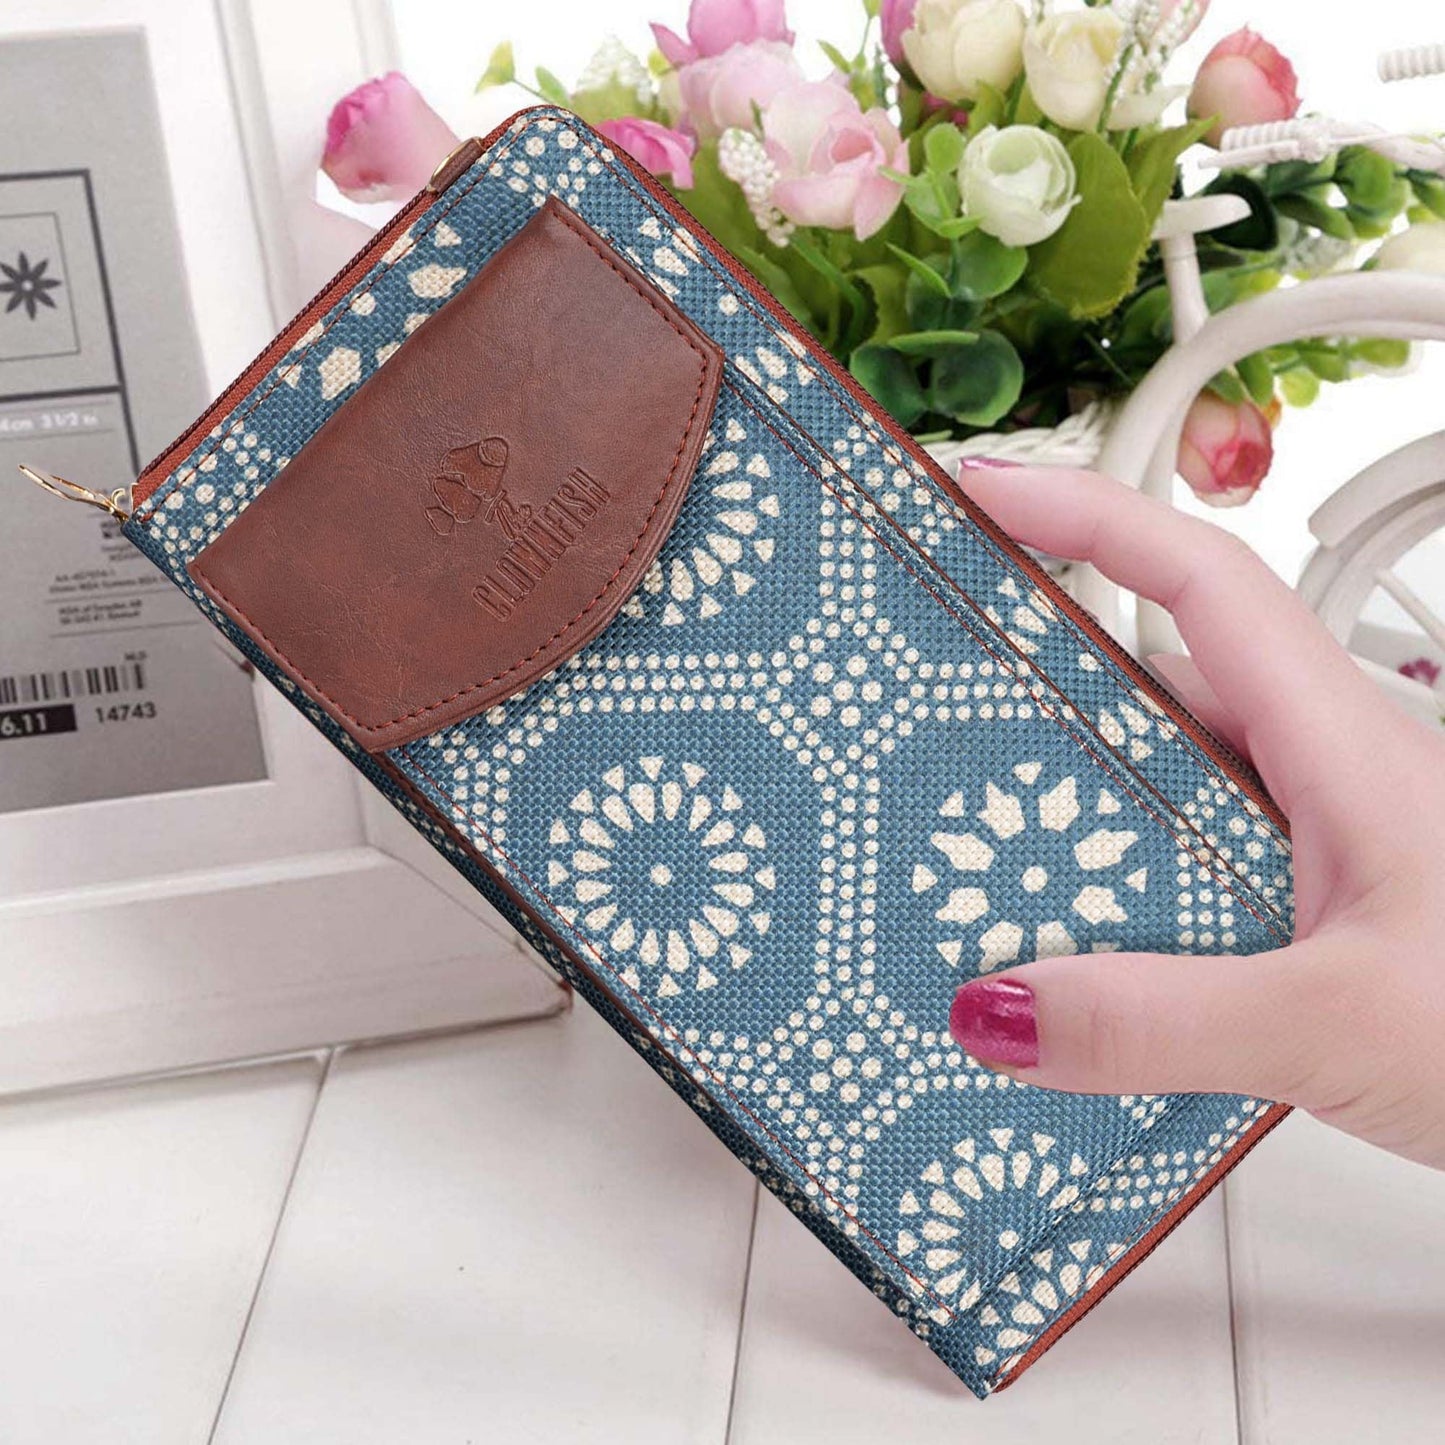 THE CLOWNFISH Fashionista Printed Handicraft Fabric  Vegan Leather Ladies Wallet Sling Bag with Front Mobile Pocket Cerulean Blue